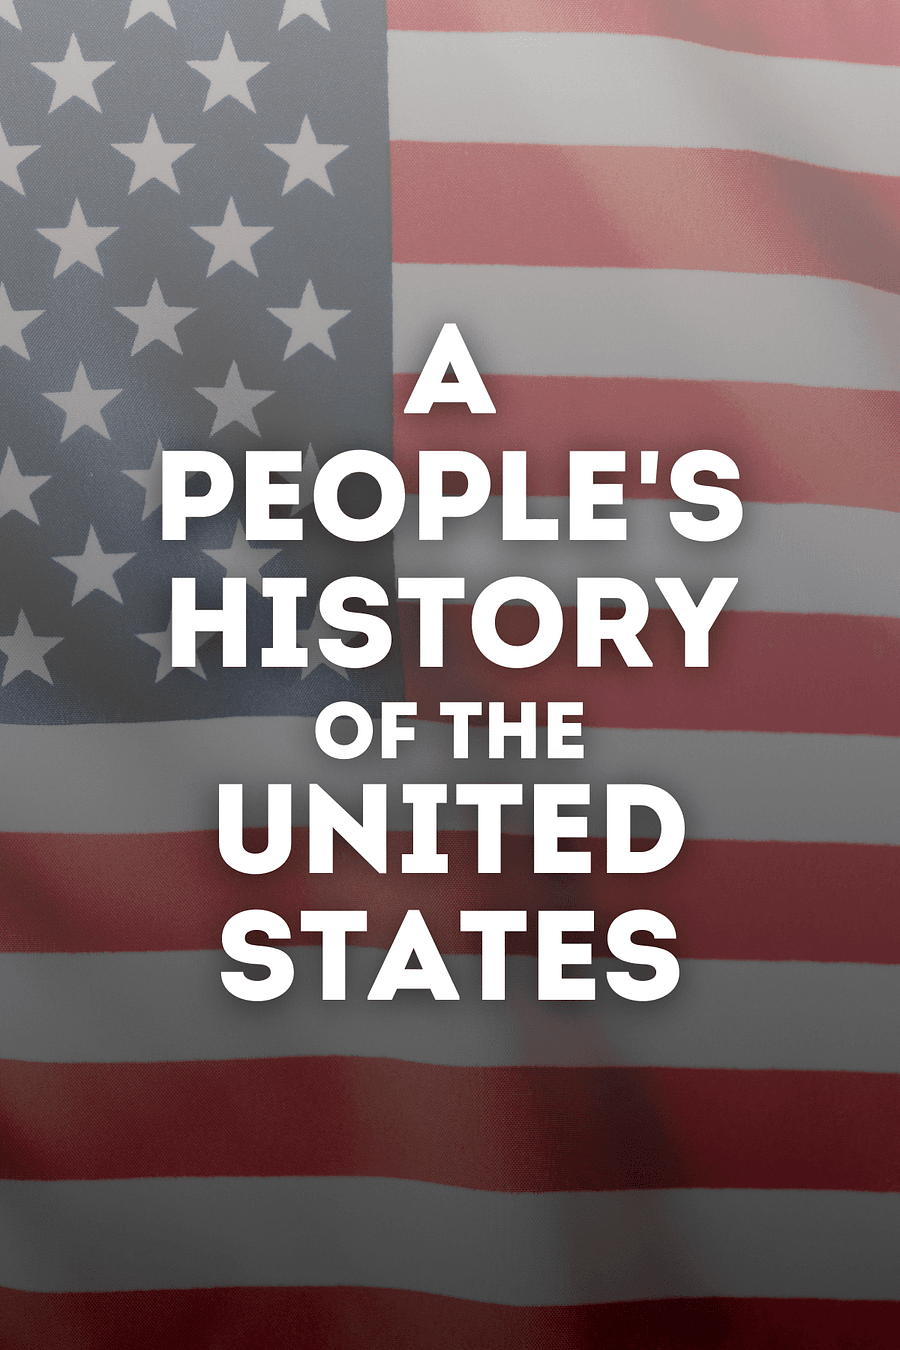 A People's History of the United States by Howard Zinn - Book Summary